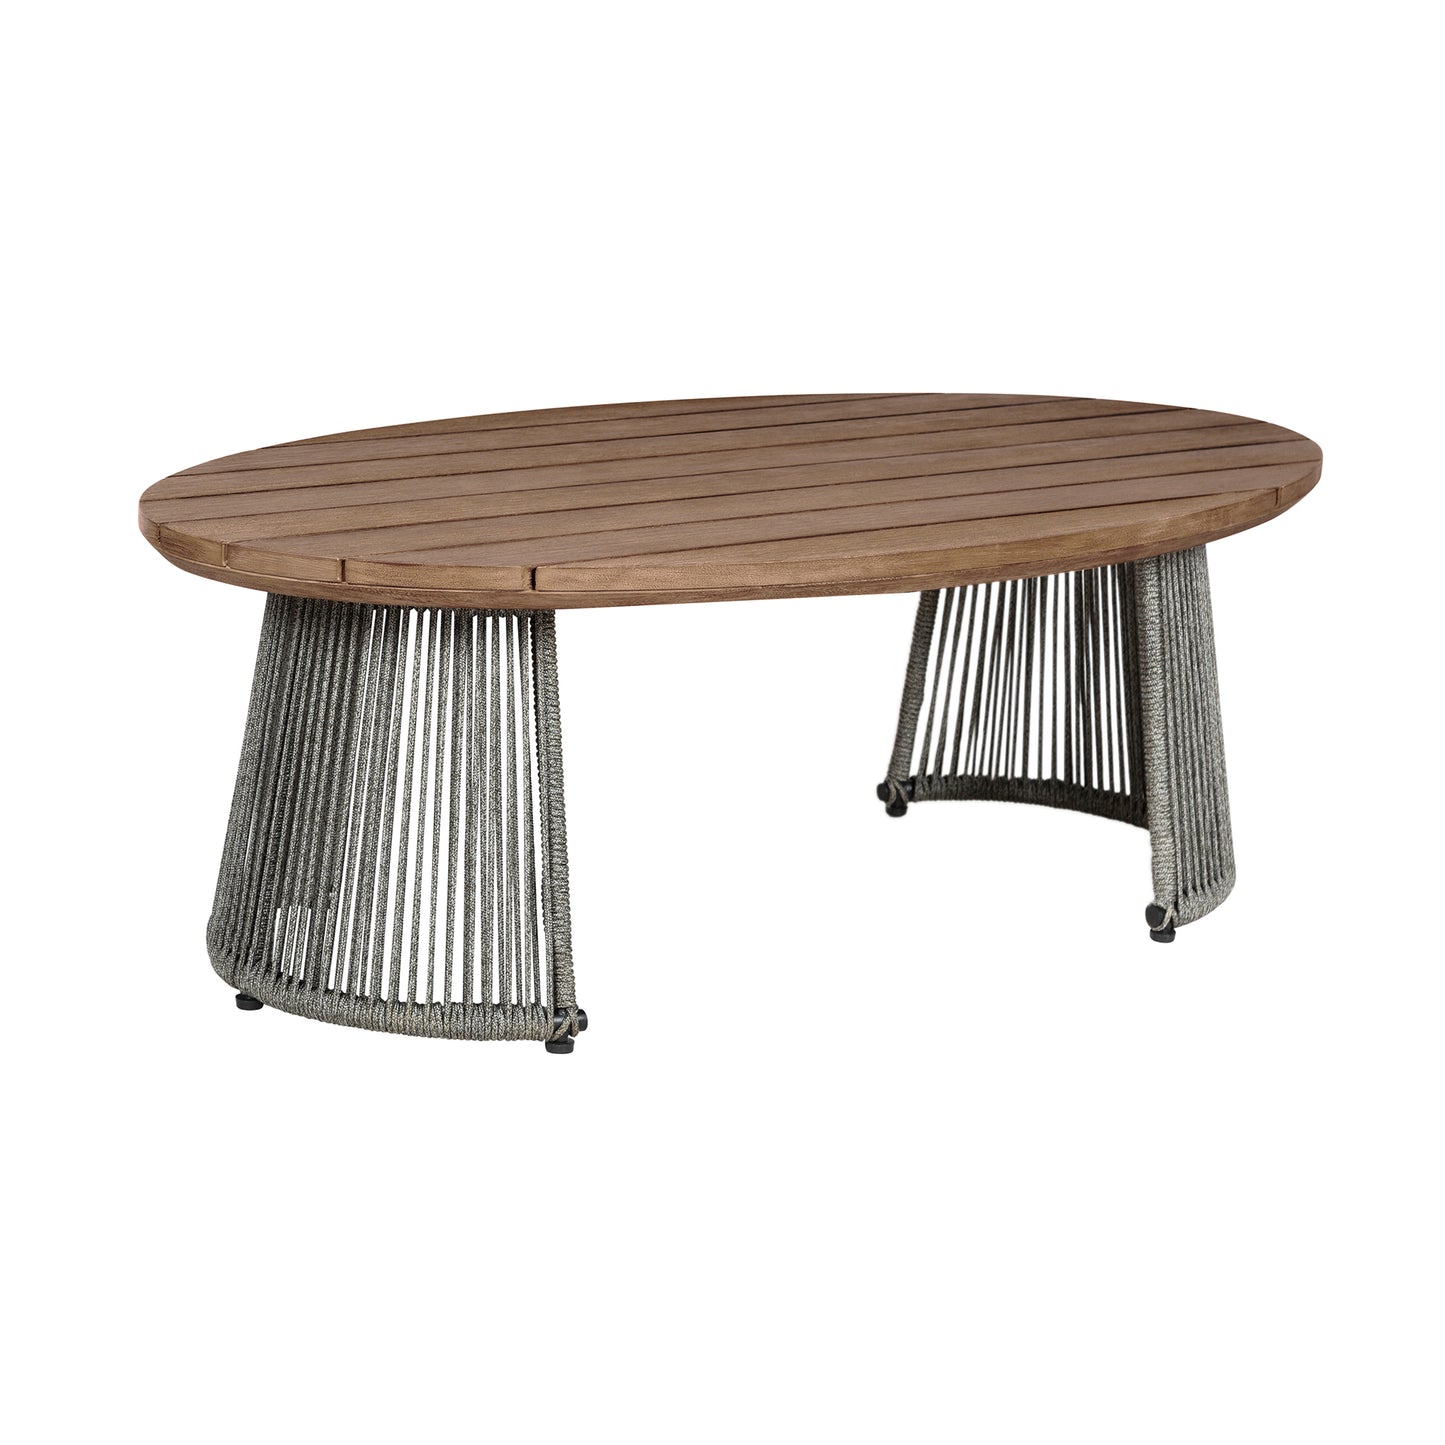 Benicia Outdoor Patio Oval Coffee Table in Weathered Eucalyptus Wood and Gray Rope